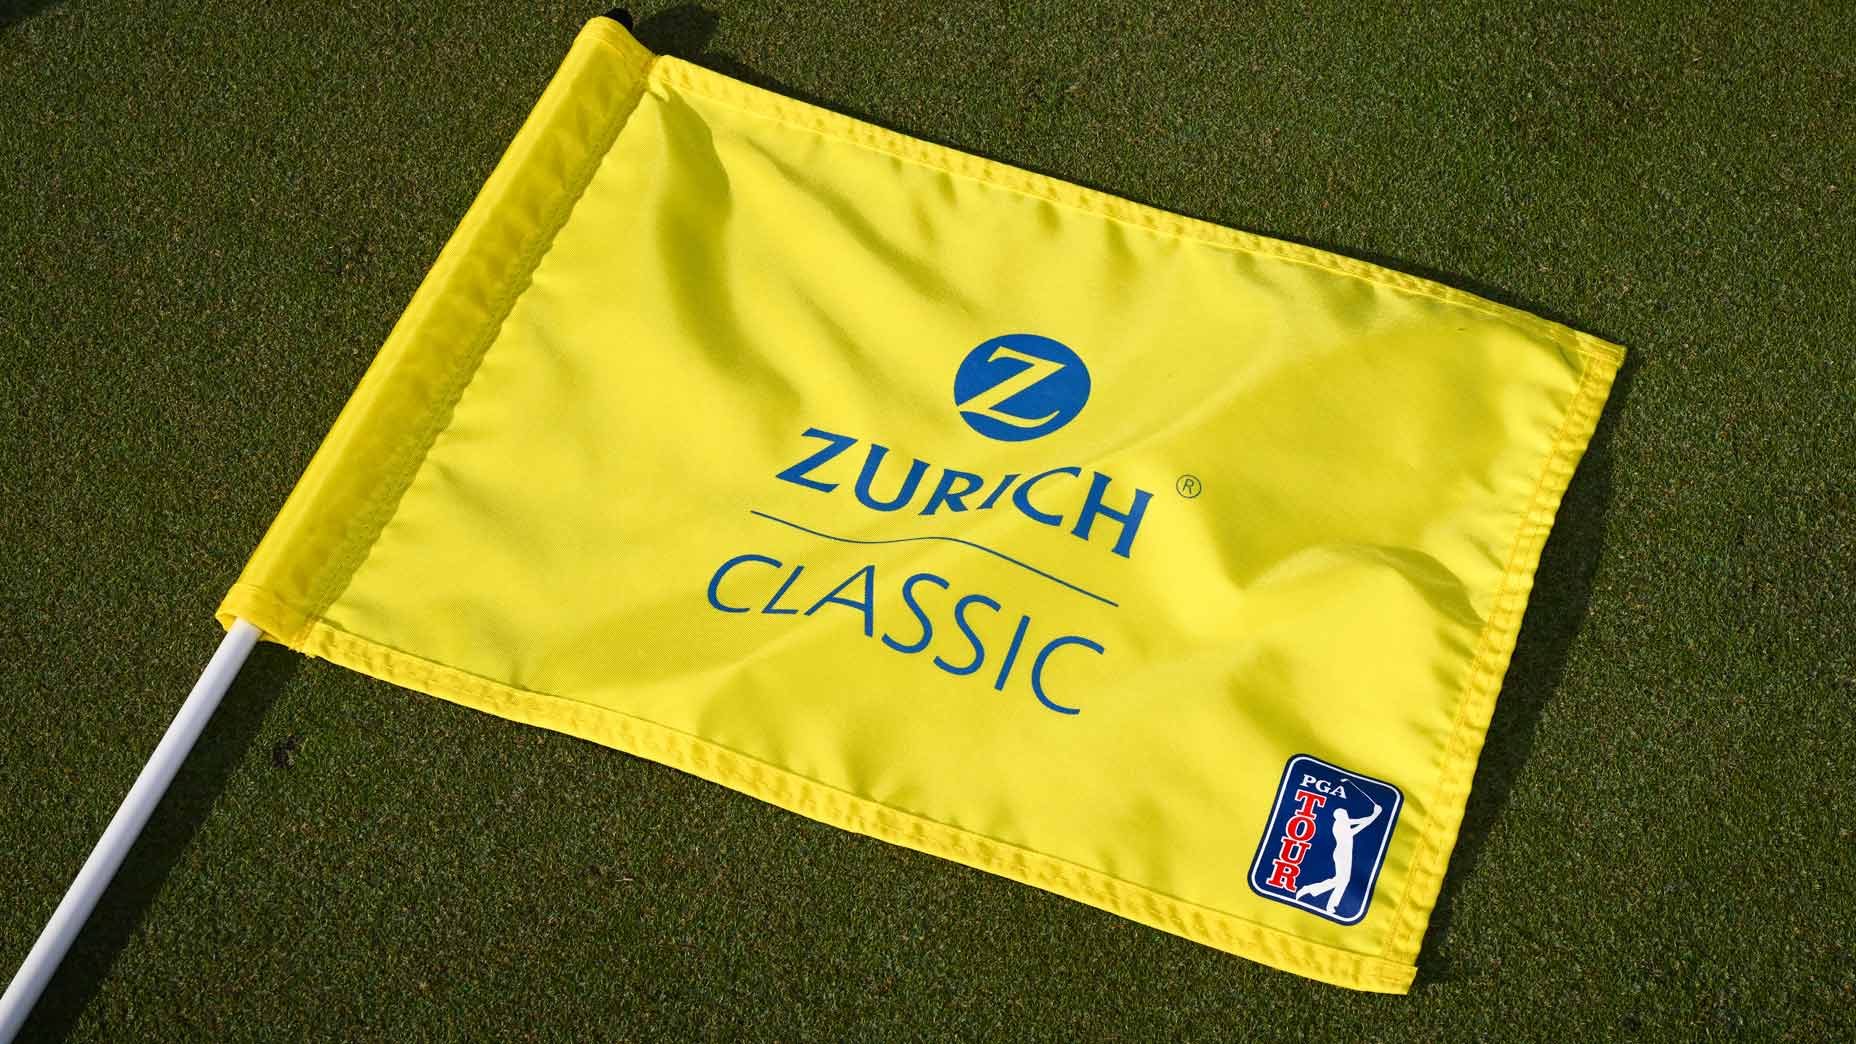 Zurich Classic flag on the 18th green at TPC Louisiana